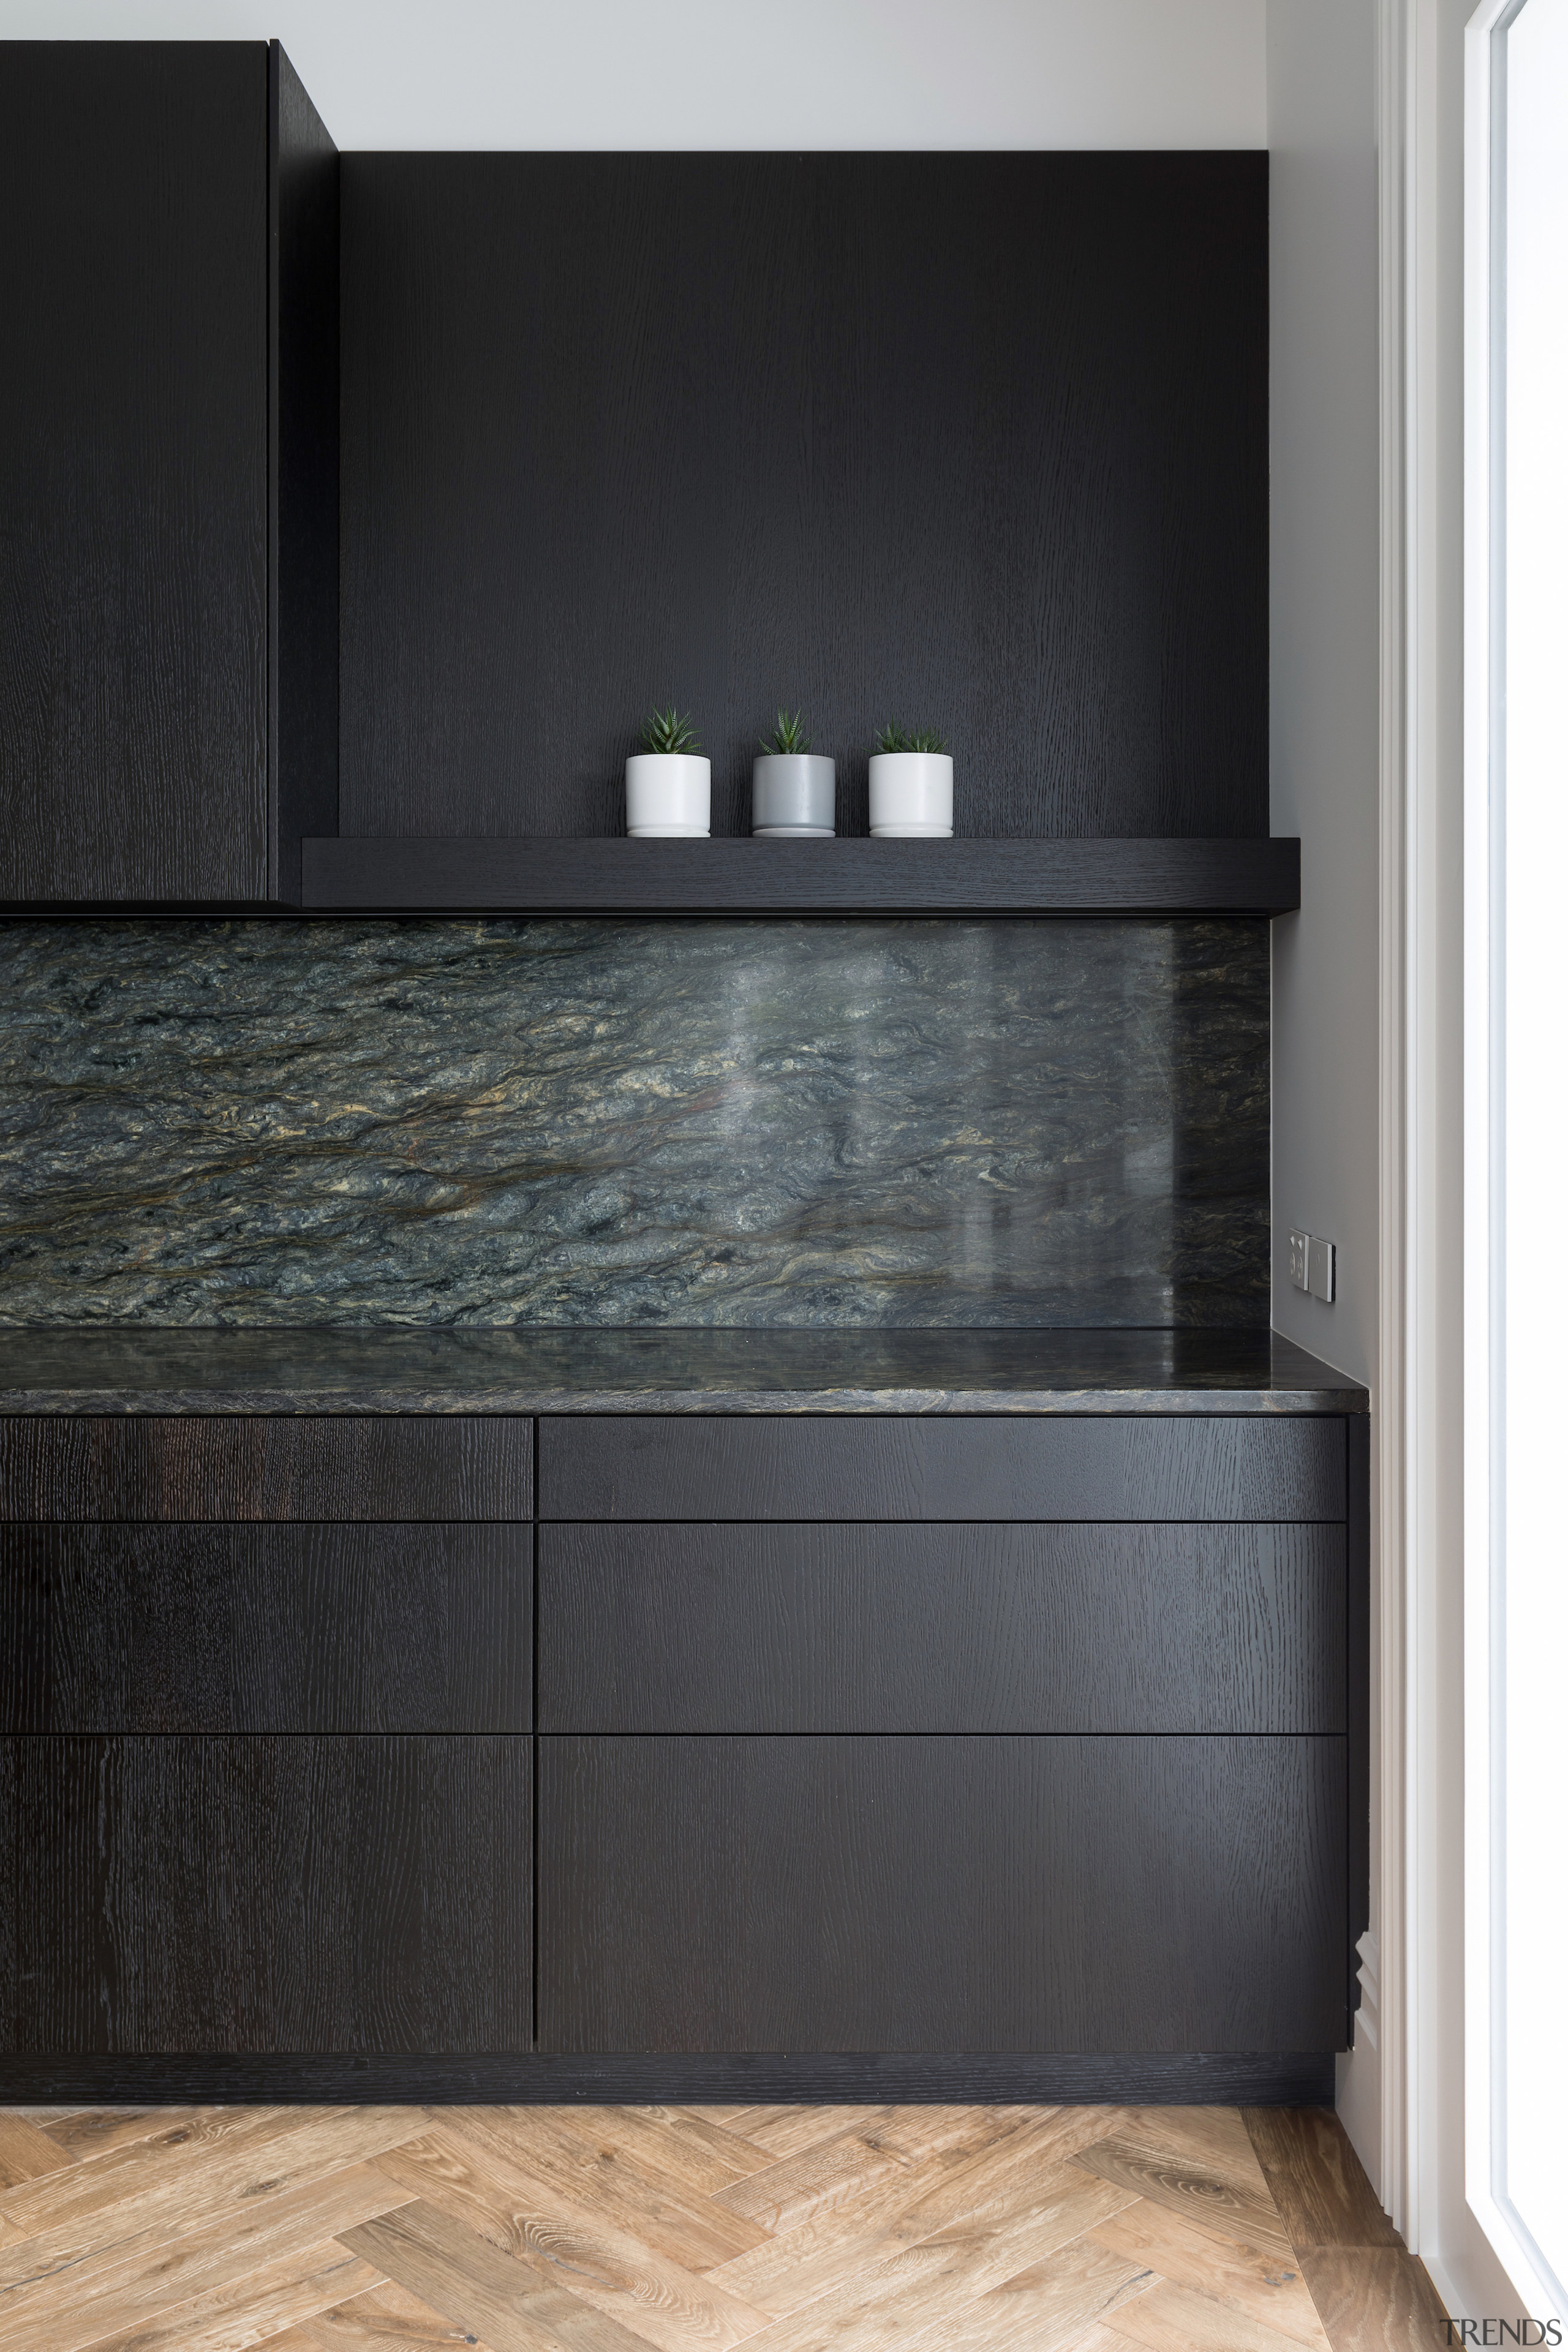 The Fusion granite benchtops turn seamlessly up the 